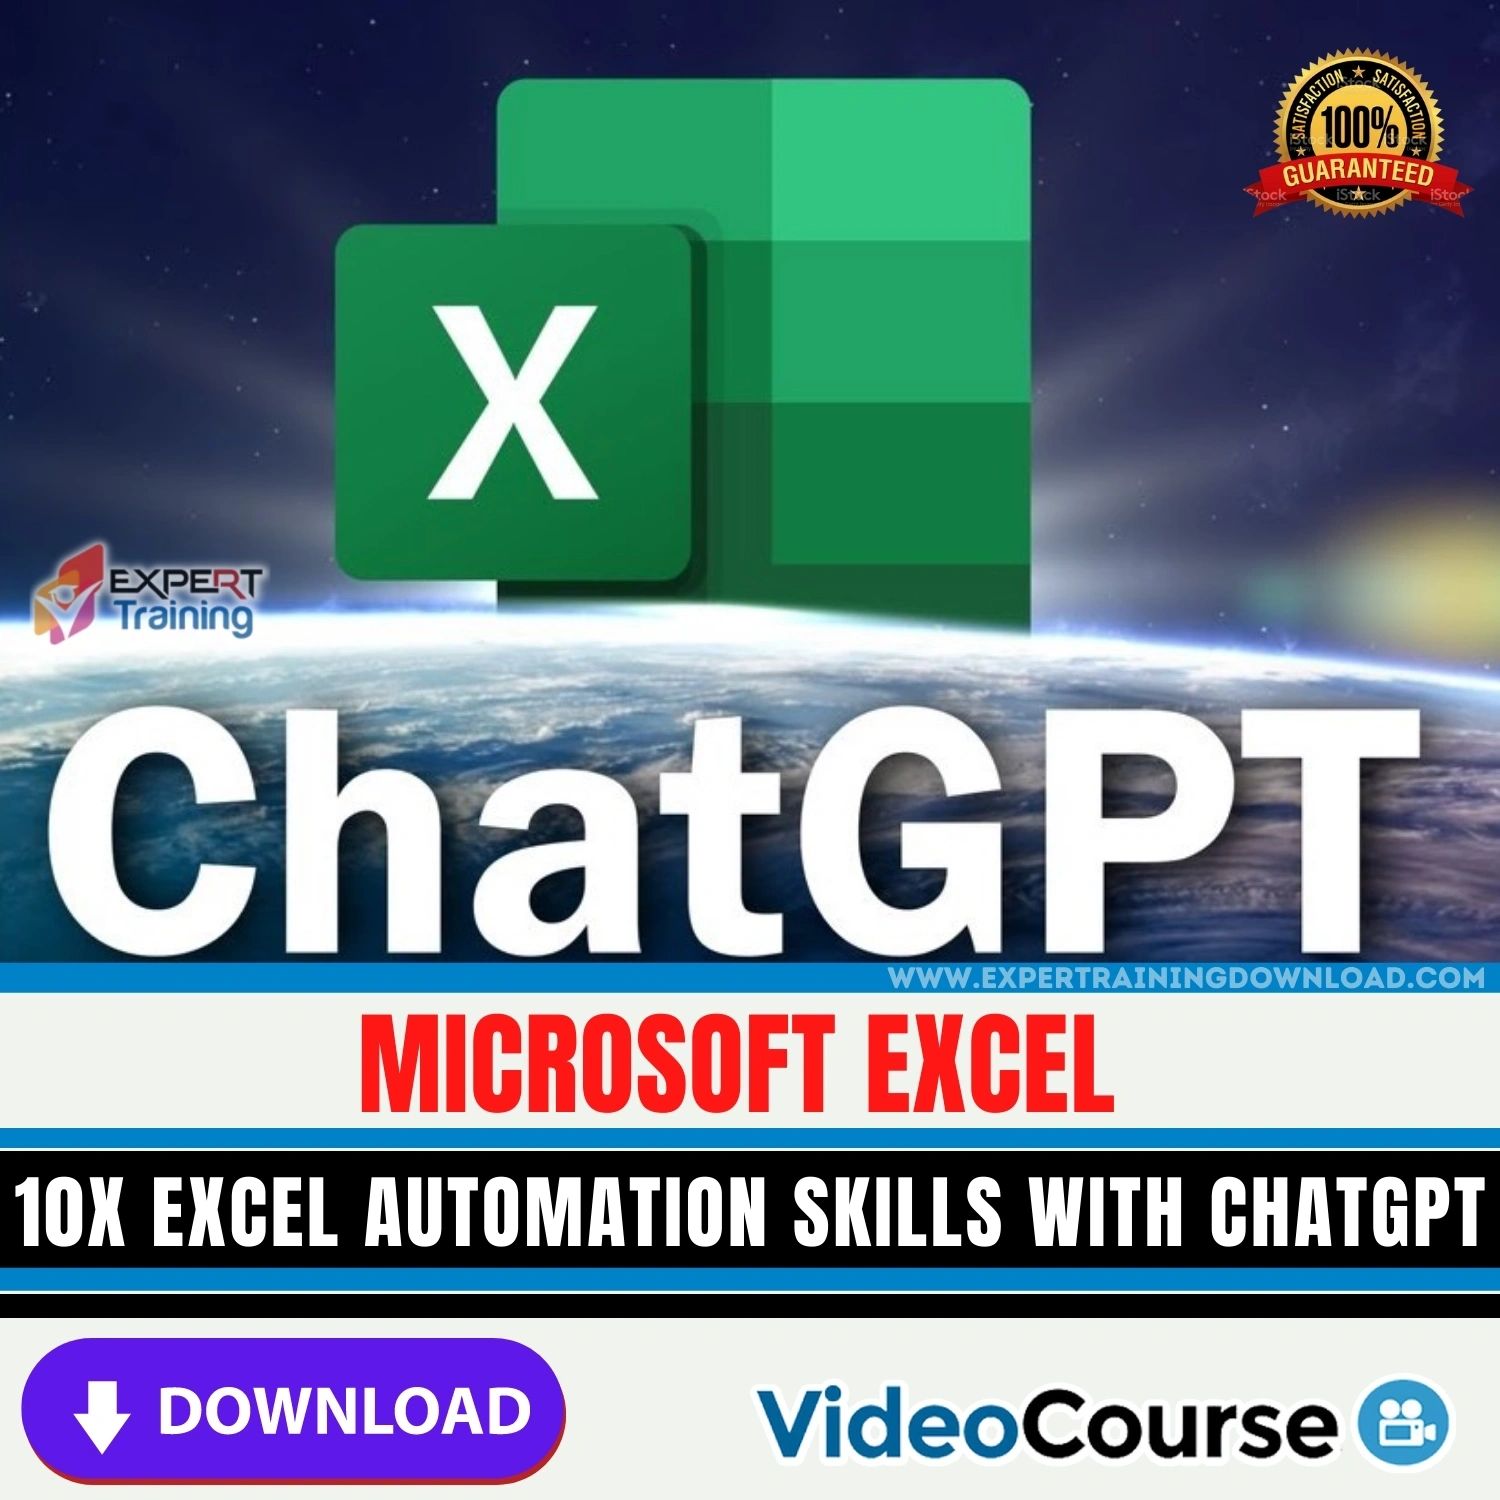 Microsoft Excel -10X Excel Automation Skills with ChatGPT